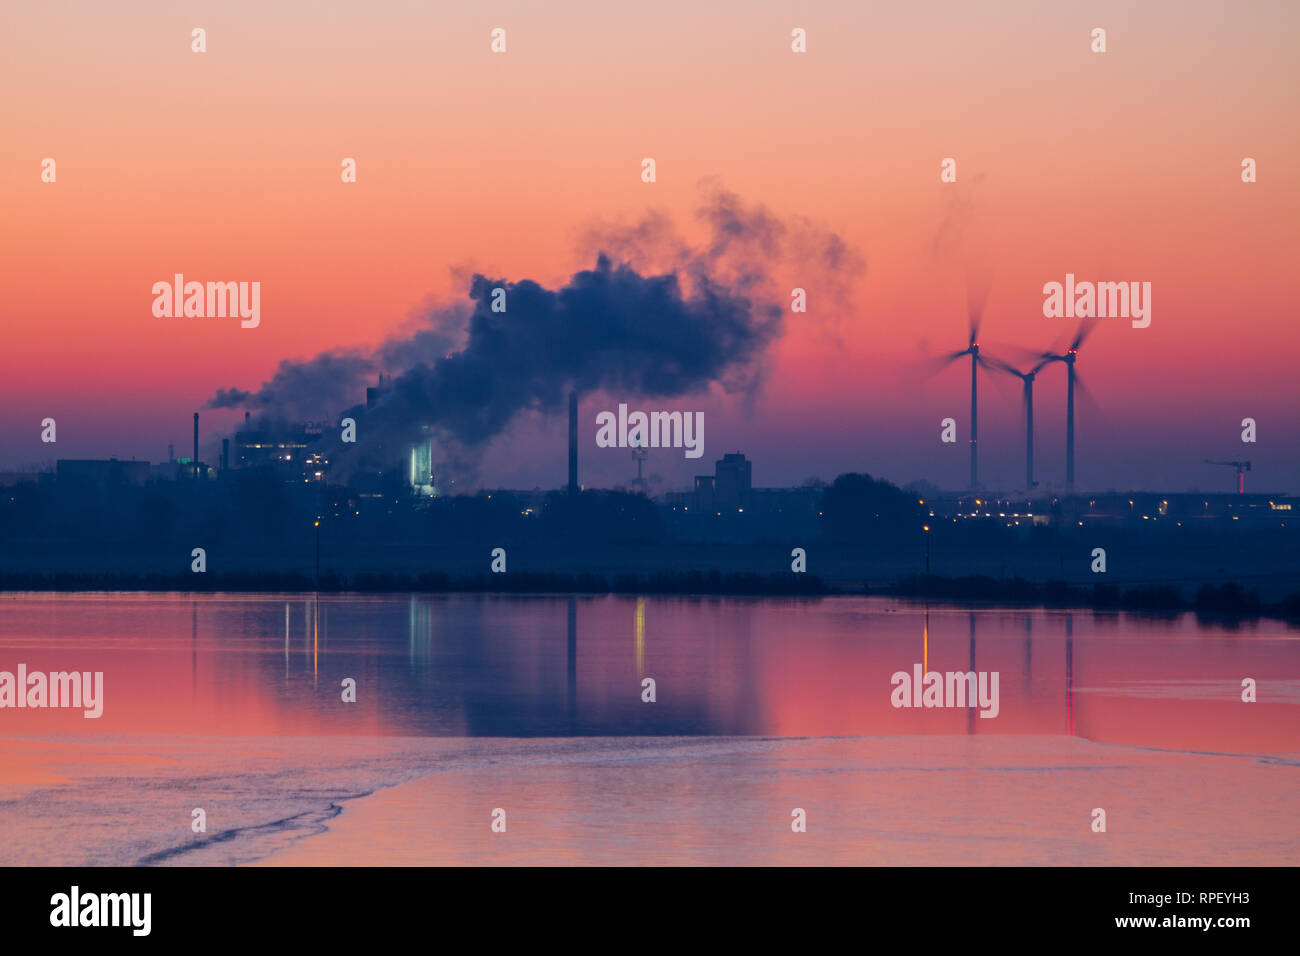 Colorful sunrise with industry buildings and wind turbines Stock Photo